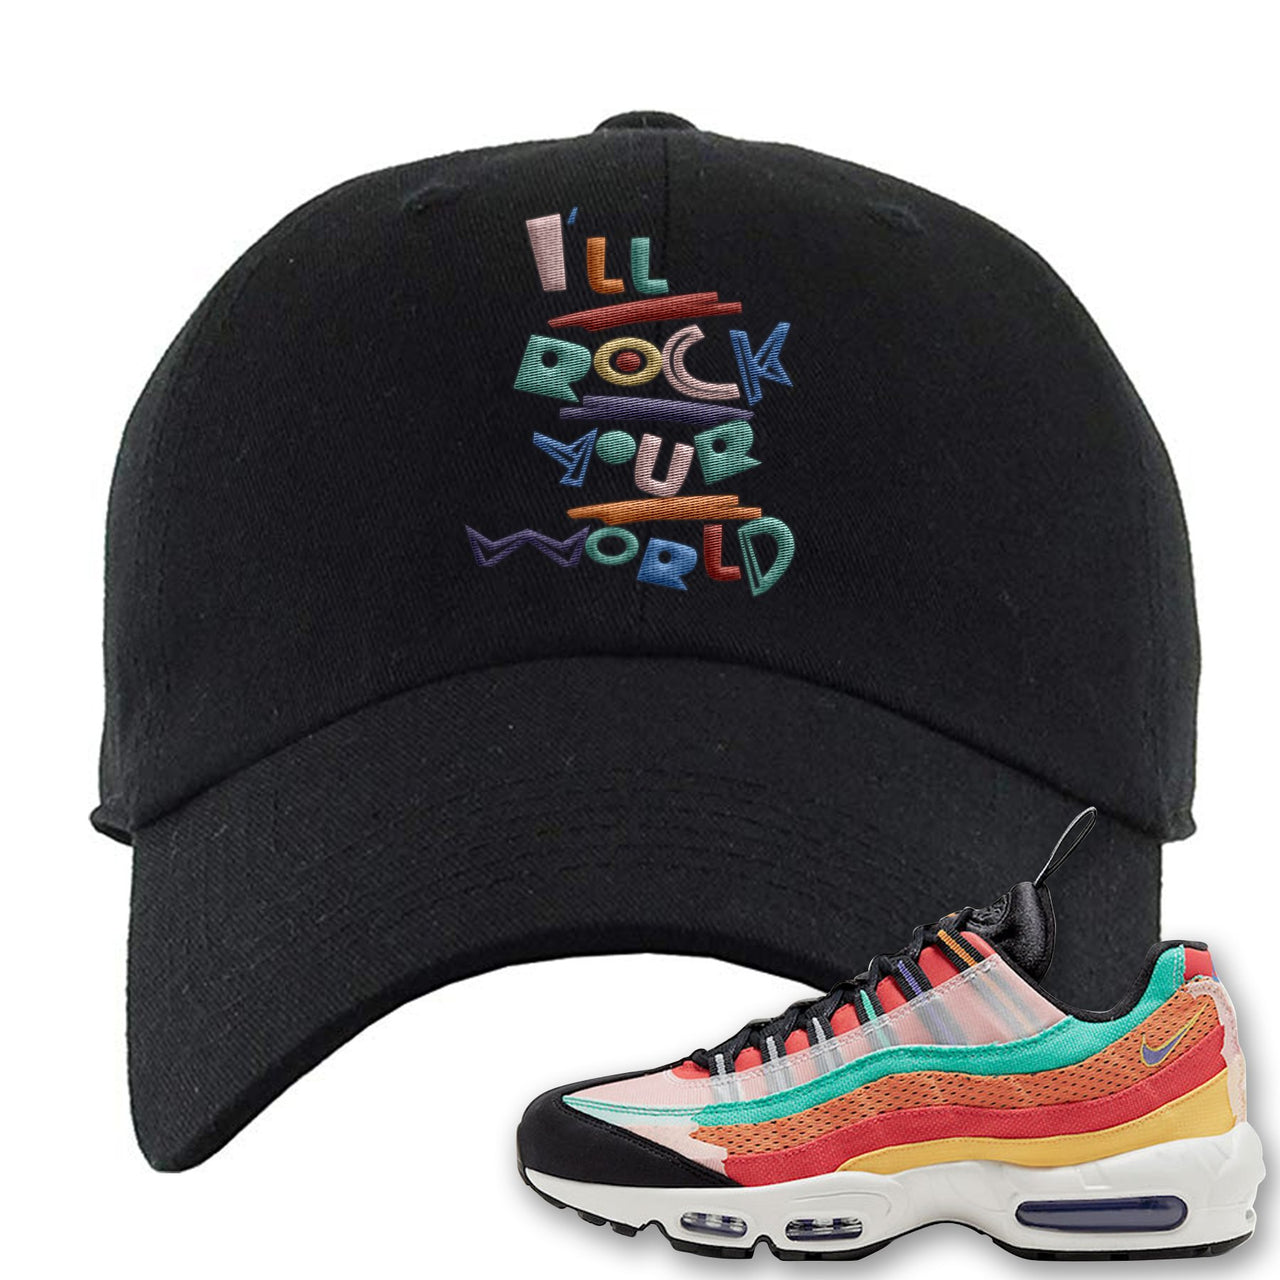 Air Max 95 Black History Month Sneaker Black Dad Hat | Hat to match Air Max 95 Black History Month Shoes | I'll Rock Your World